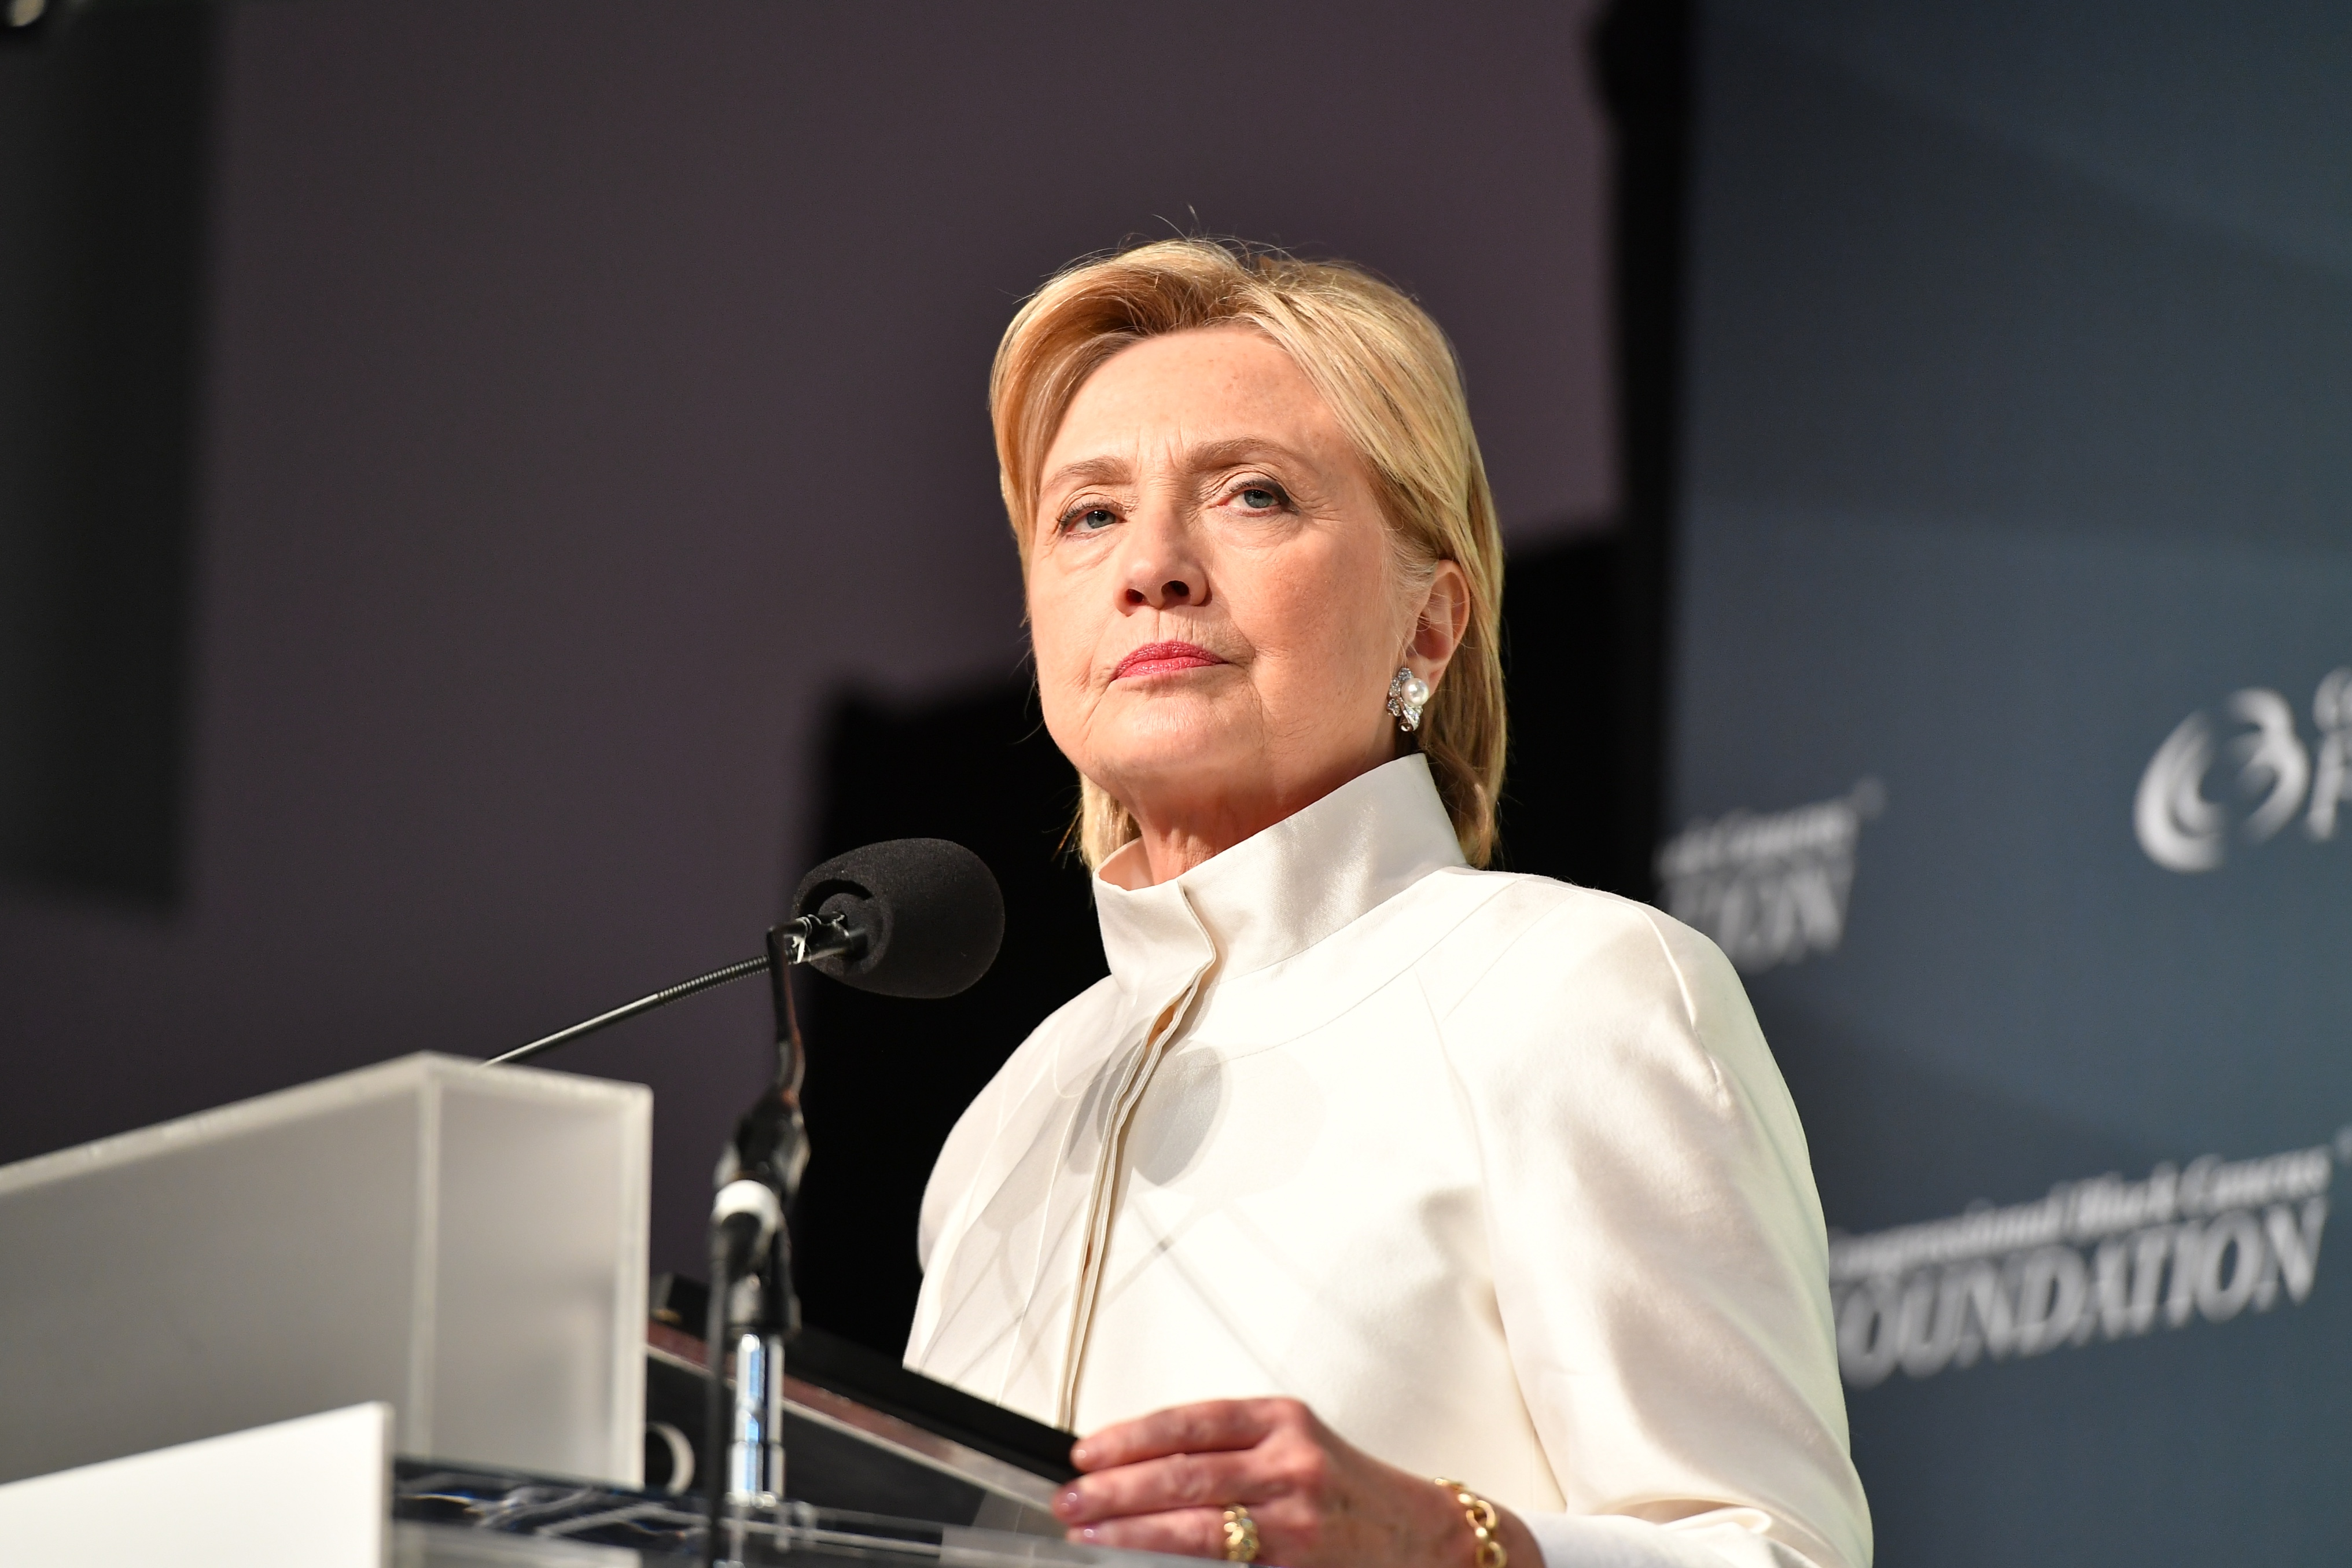 Presidential candidate Hillary Clinton speaks at the Phoenix Awards Dinner at Walter E. Washington Convention Center in Washington, D.C.,  on Sept. 17, 2016. (Earl Gibson III—Getty Images)